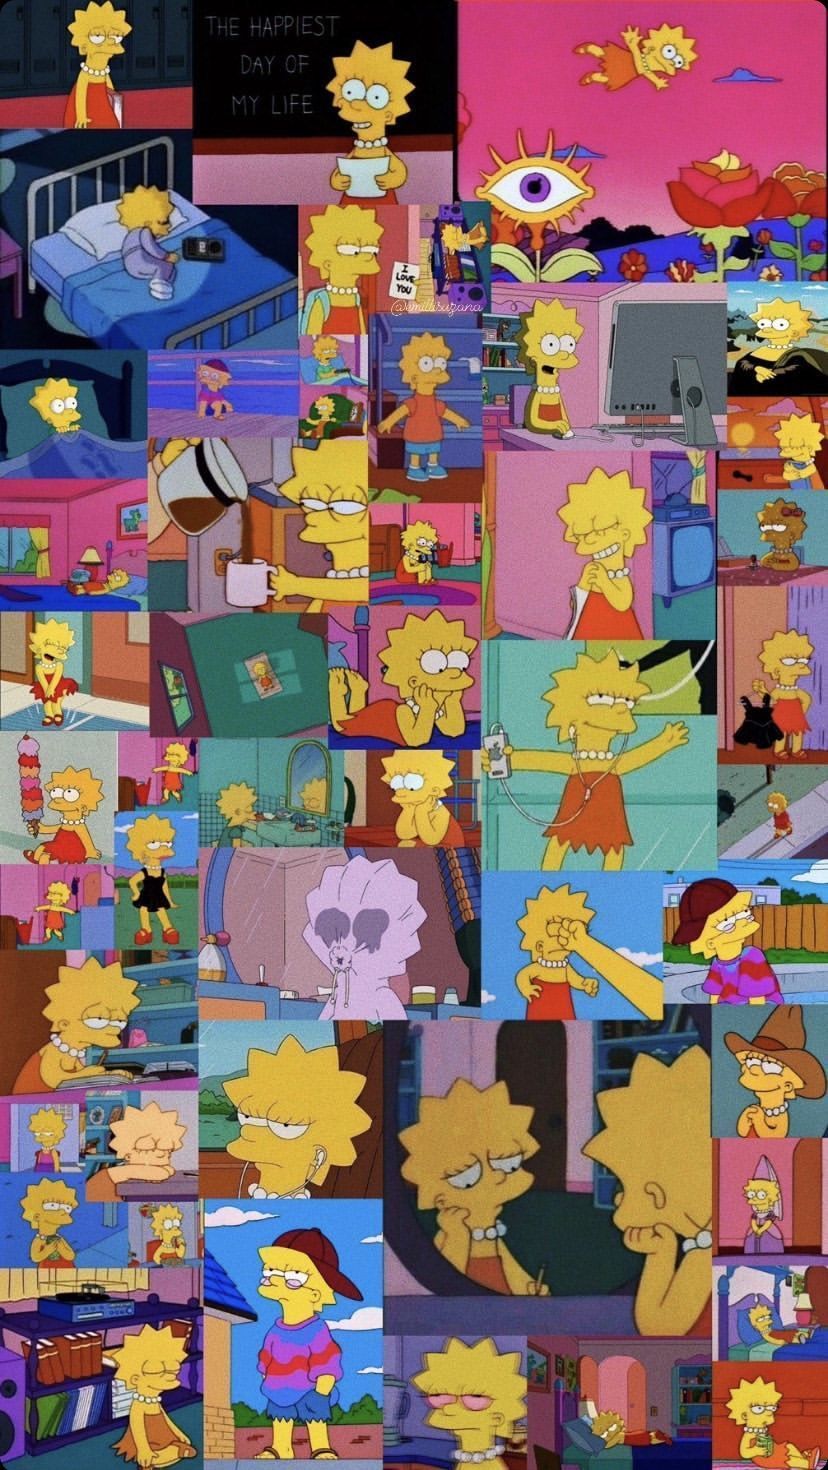 A collage of the simpsons characters - The Simpsons, Lisa Simpson, Bart Simpson